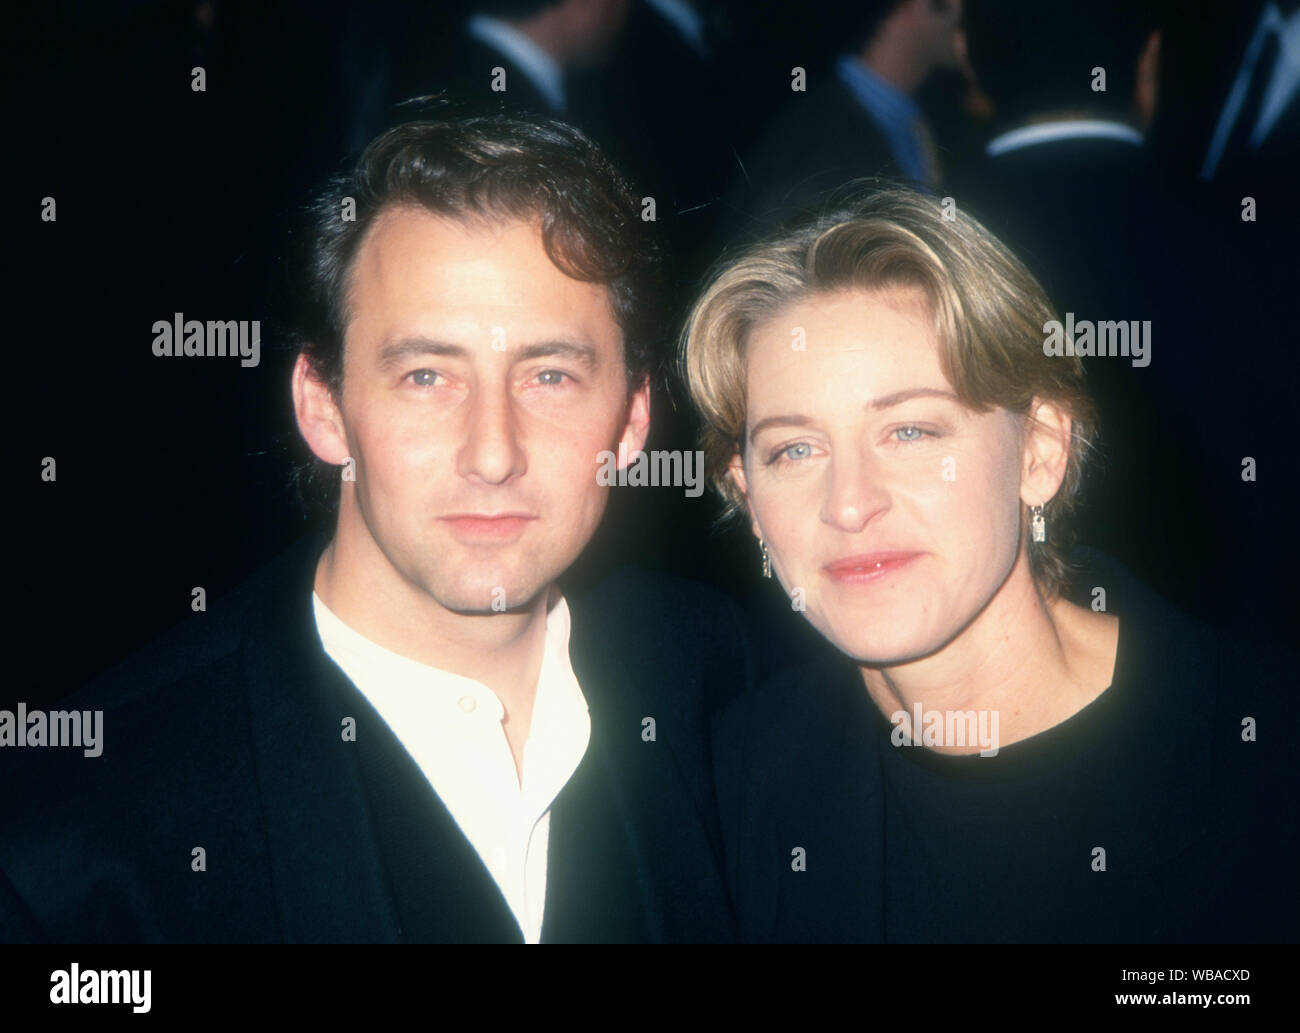 Westwood, California, USA 9th November 1994 Actor Arye Gross and comedian Ellen  DeGeneres attend Warner Bros. Pictures World Premiere of 'Interview With  The Vampire: The Vampire Chronicles' on November 9, 1994 at